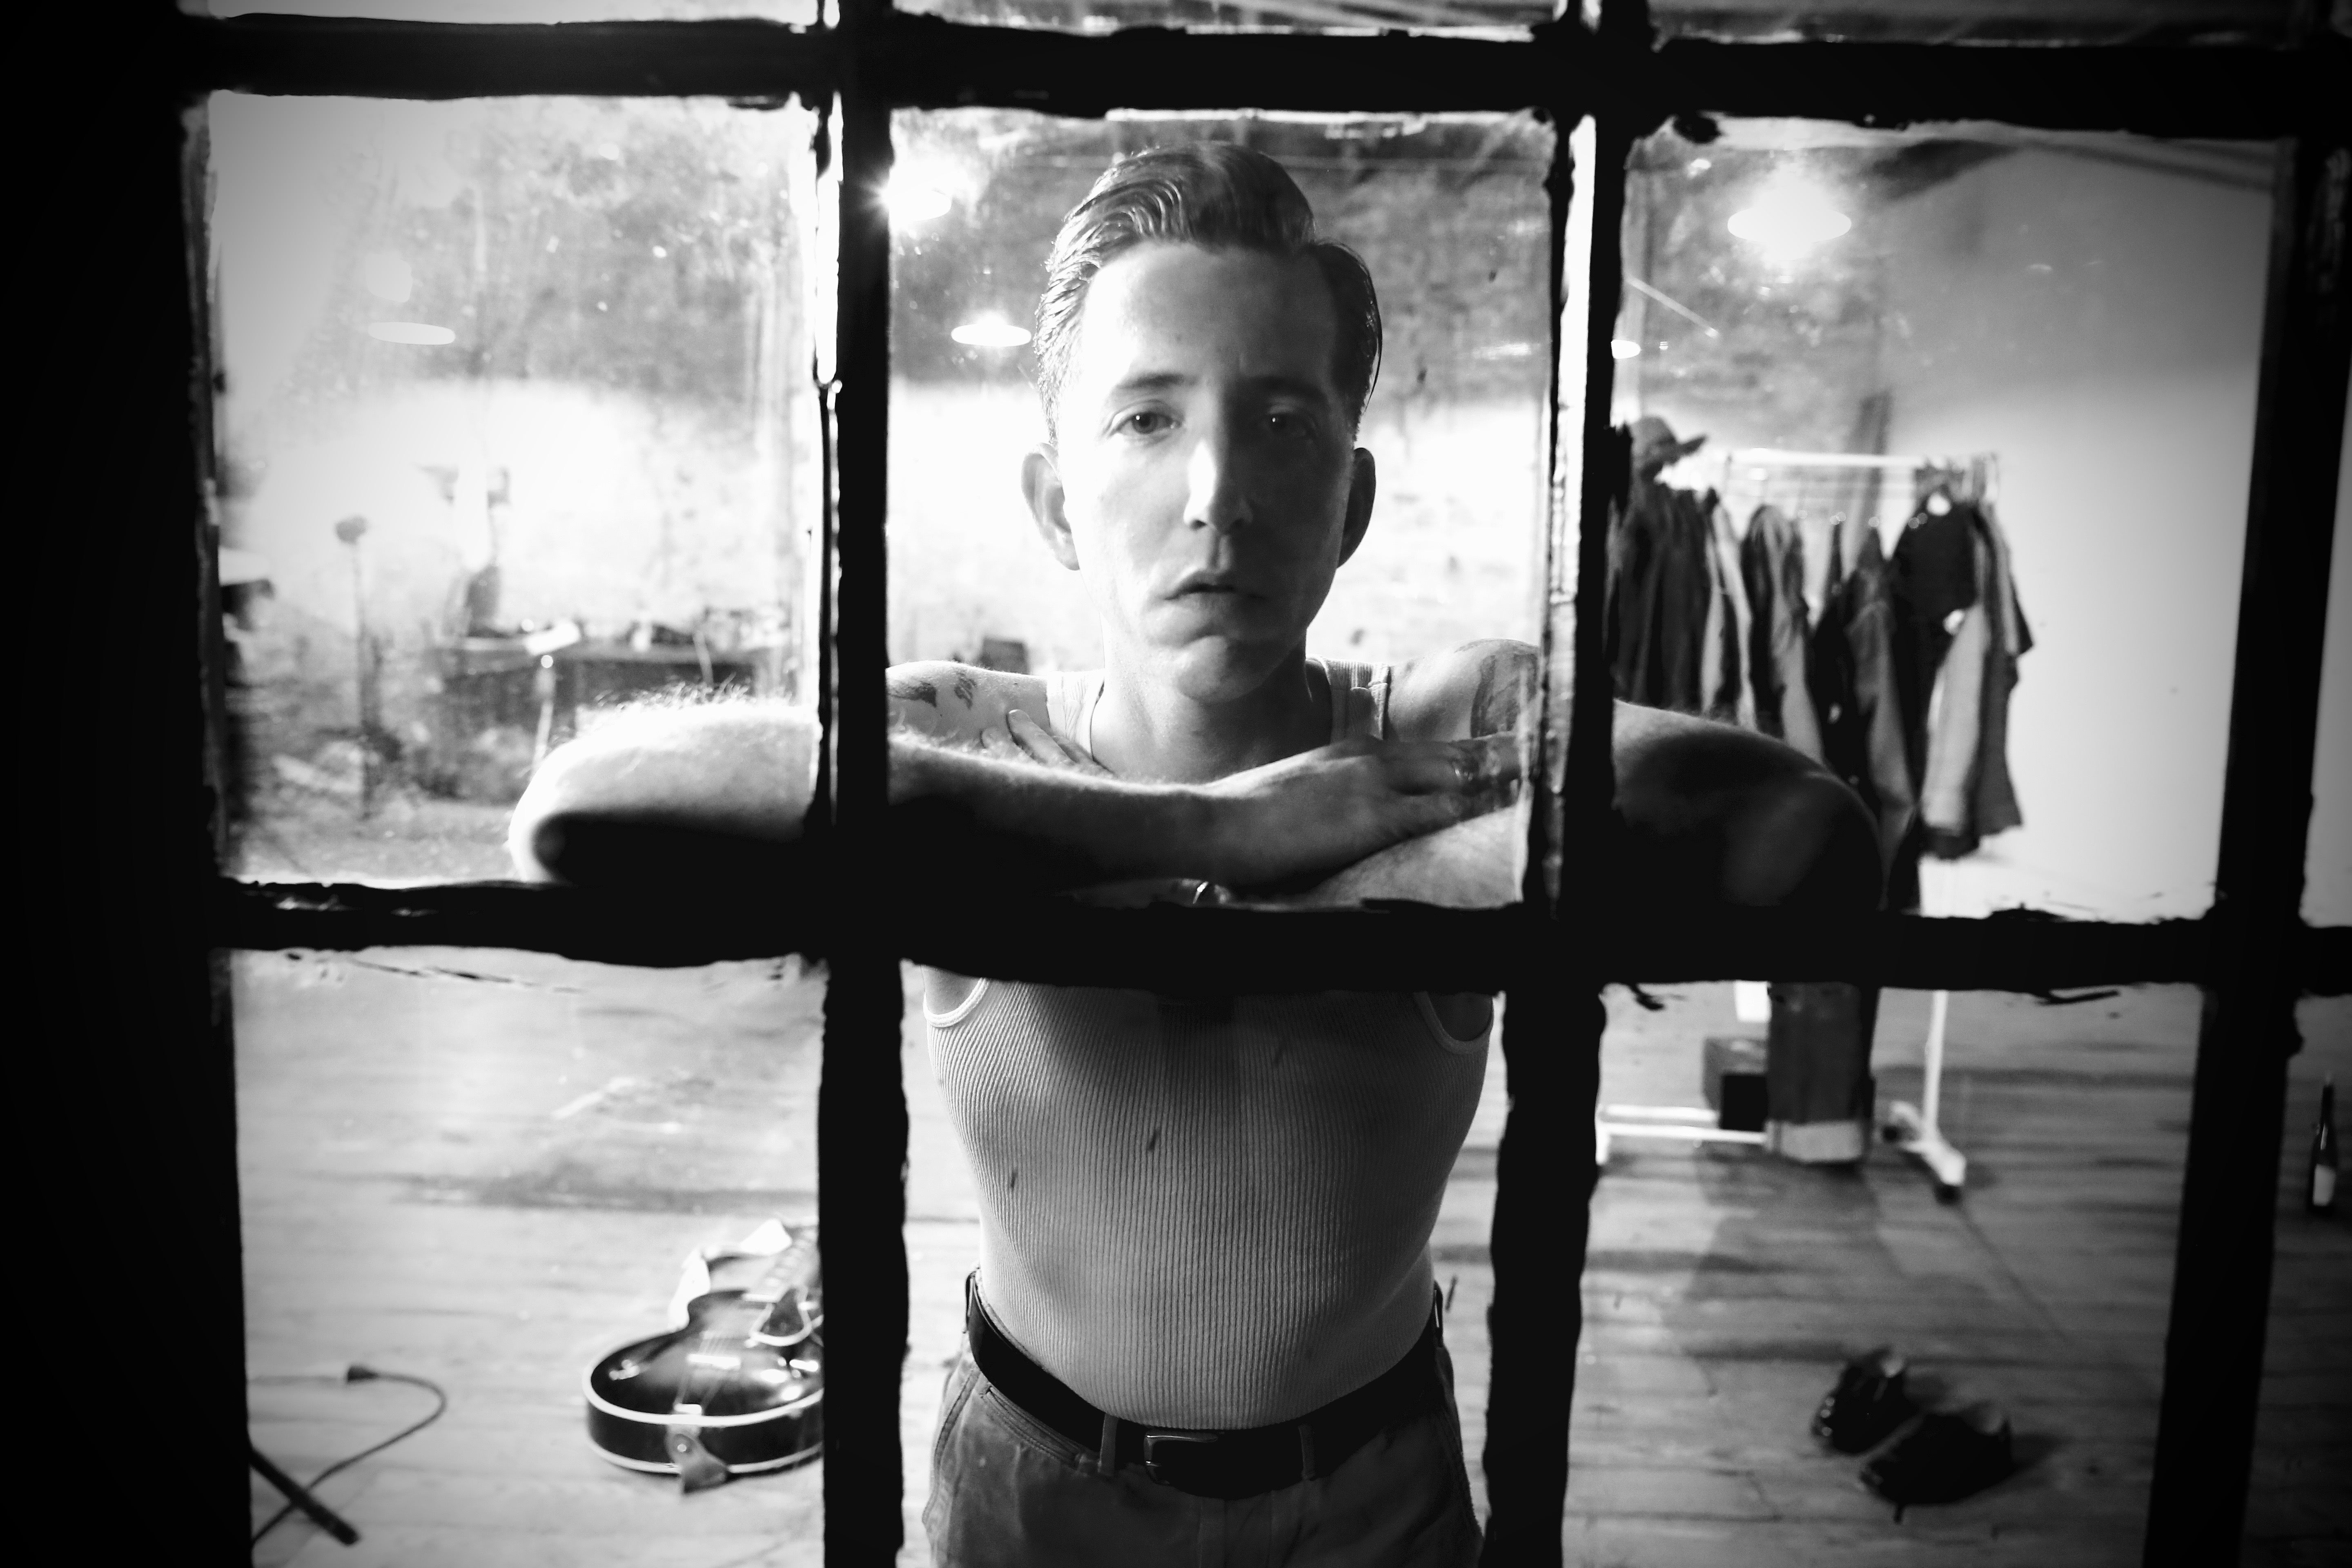 An Evening with Pokey LaFarge at Skully's Music Diner